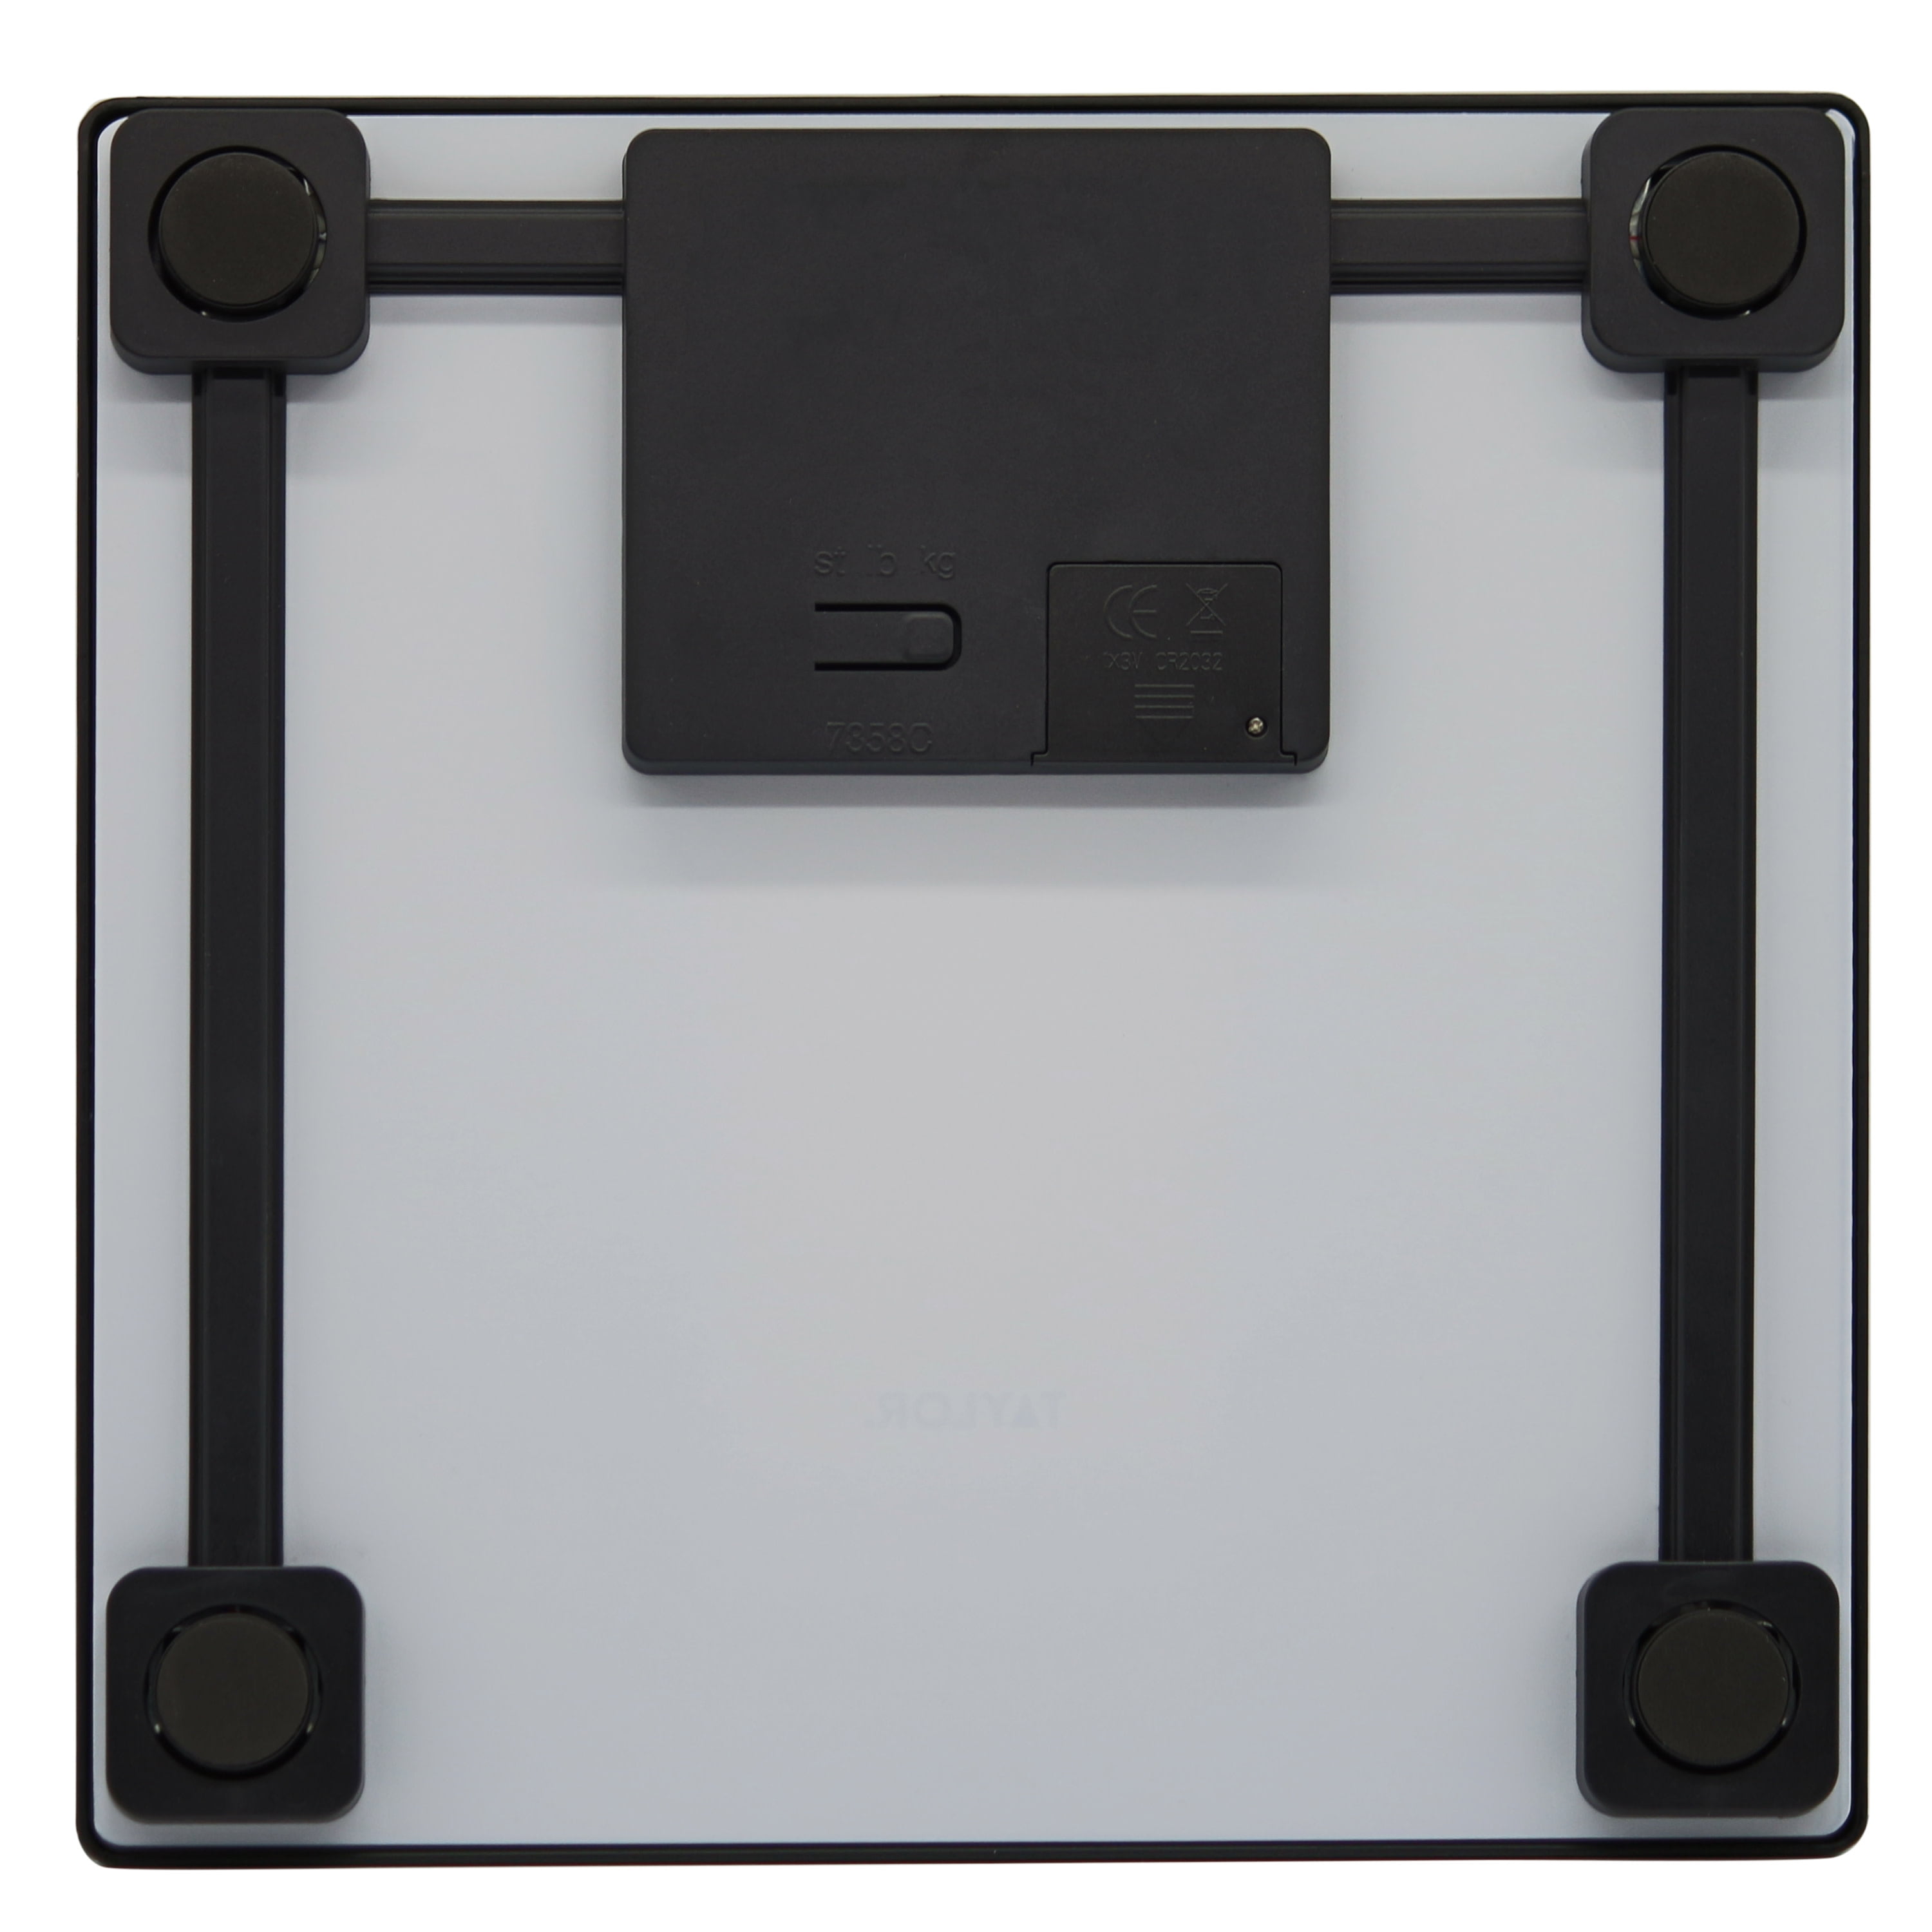 Taylor Bathroom Scale - Charcoal Gray, 1 ct - Fred Meyer